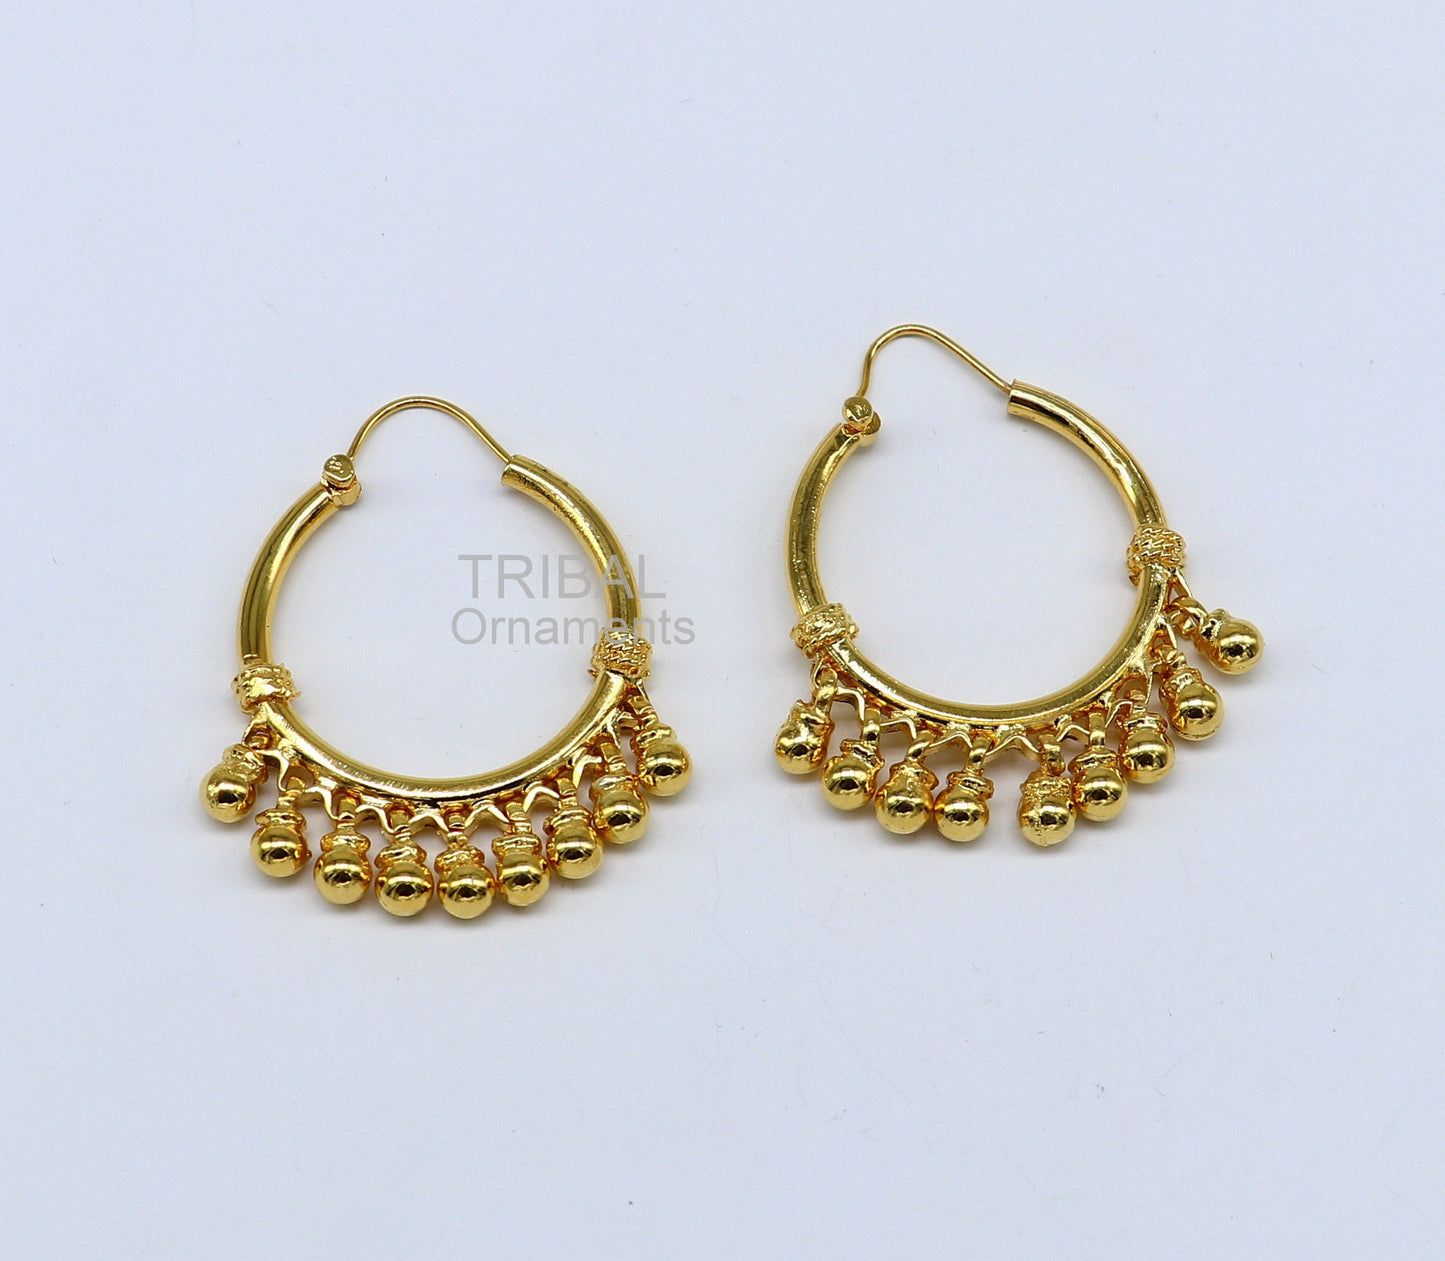 Vintage antique design handmade 925 sterling silver gorgeous gold polished hoops boho earrings bali with bells tribal Banjara jewelry s1147 - TRIBAL ORNAMENTS